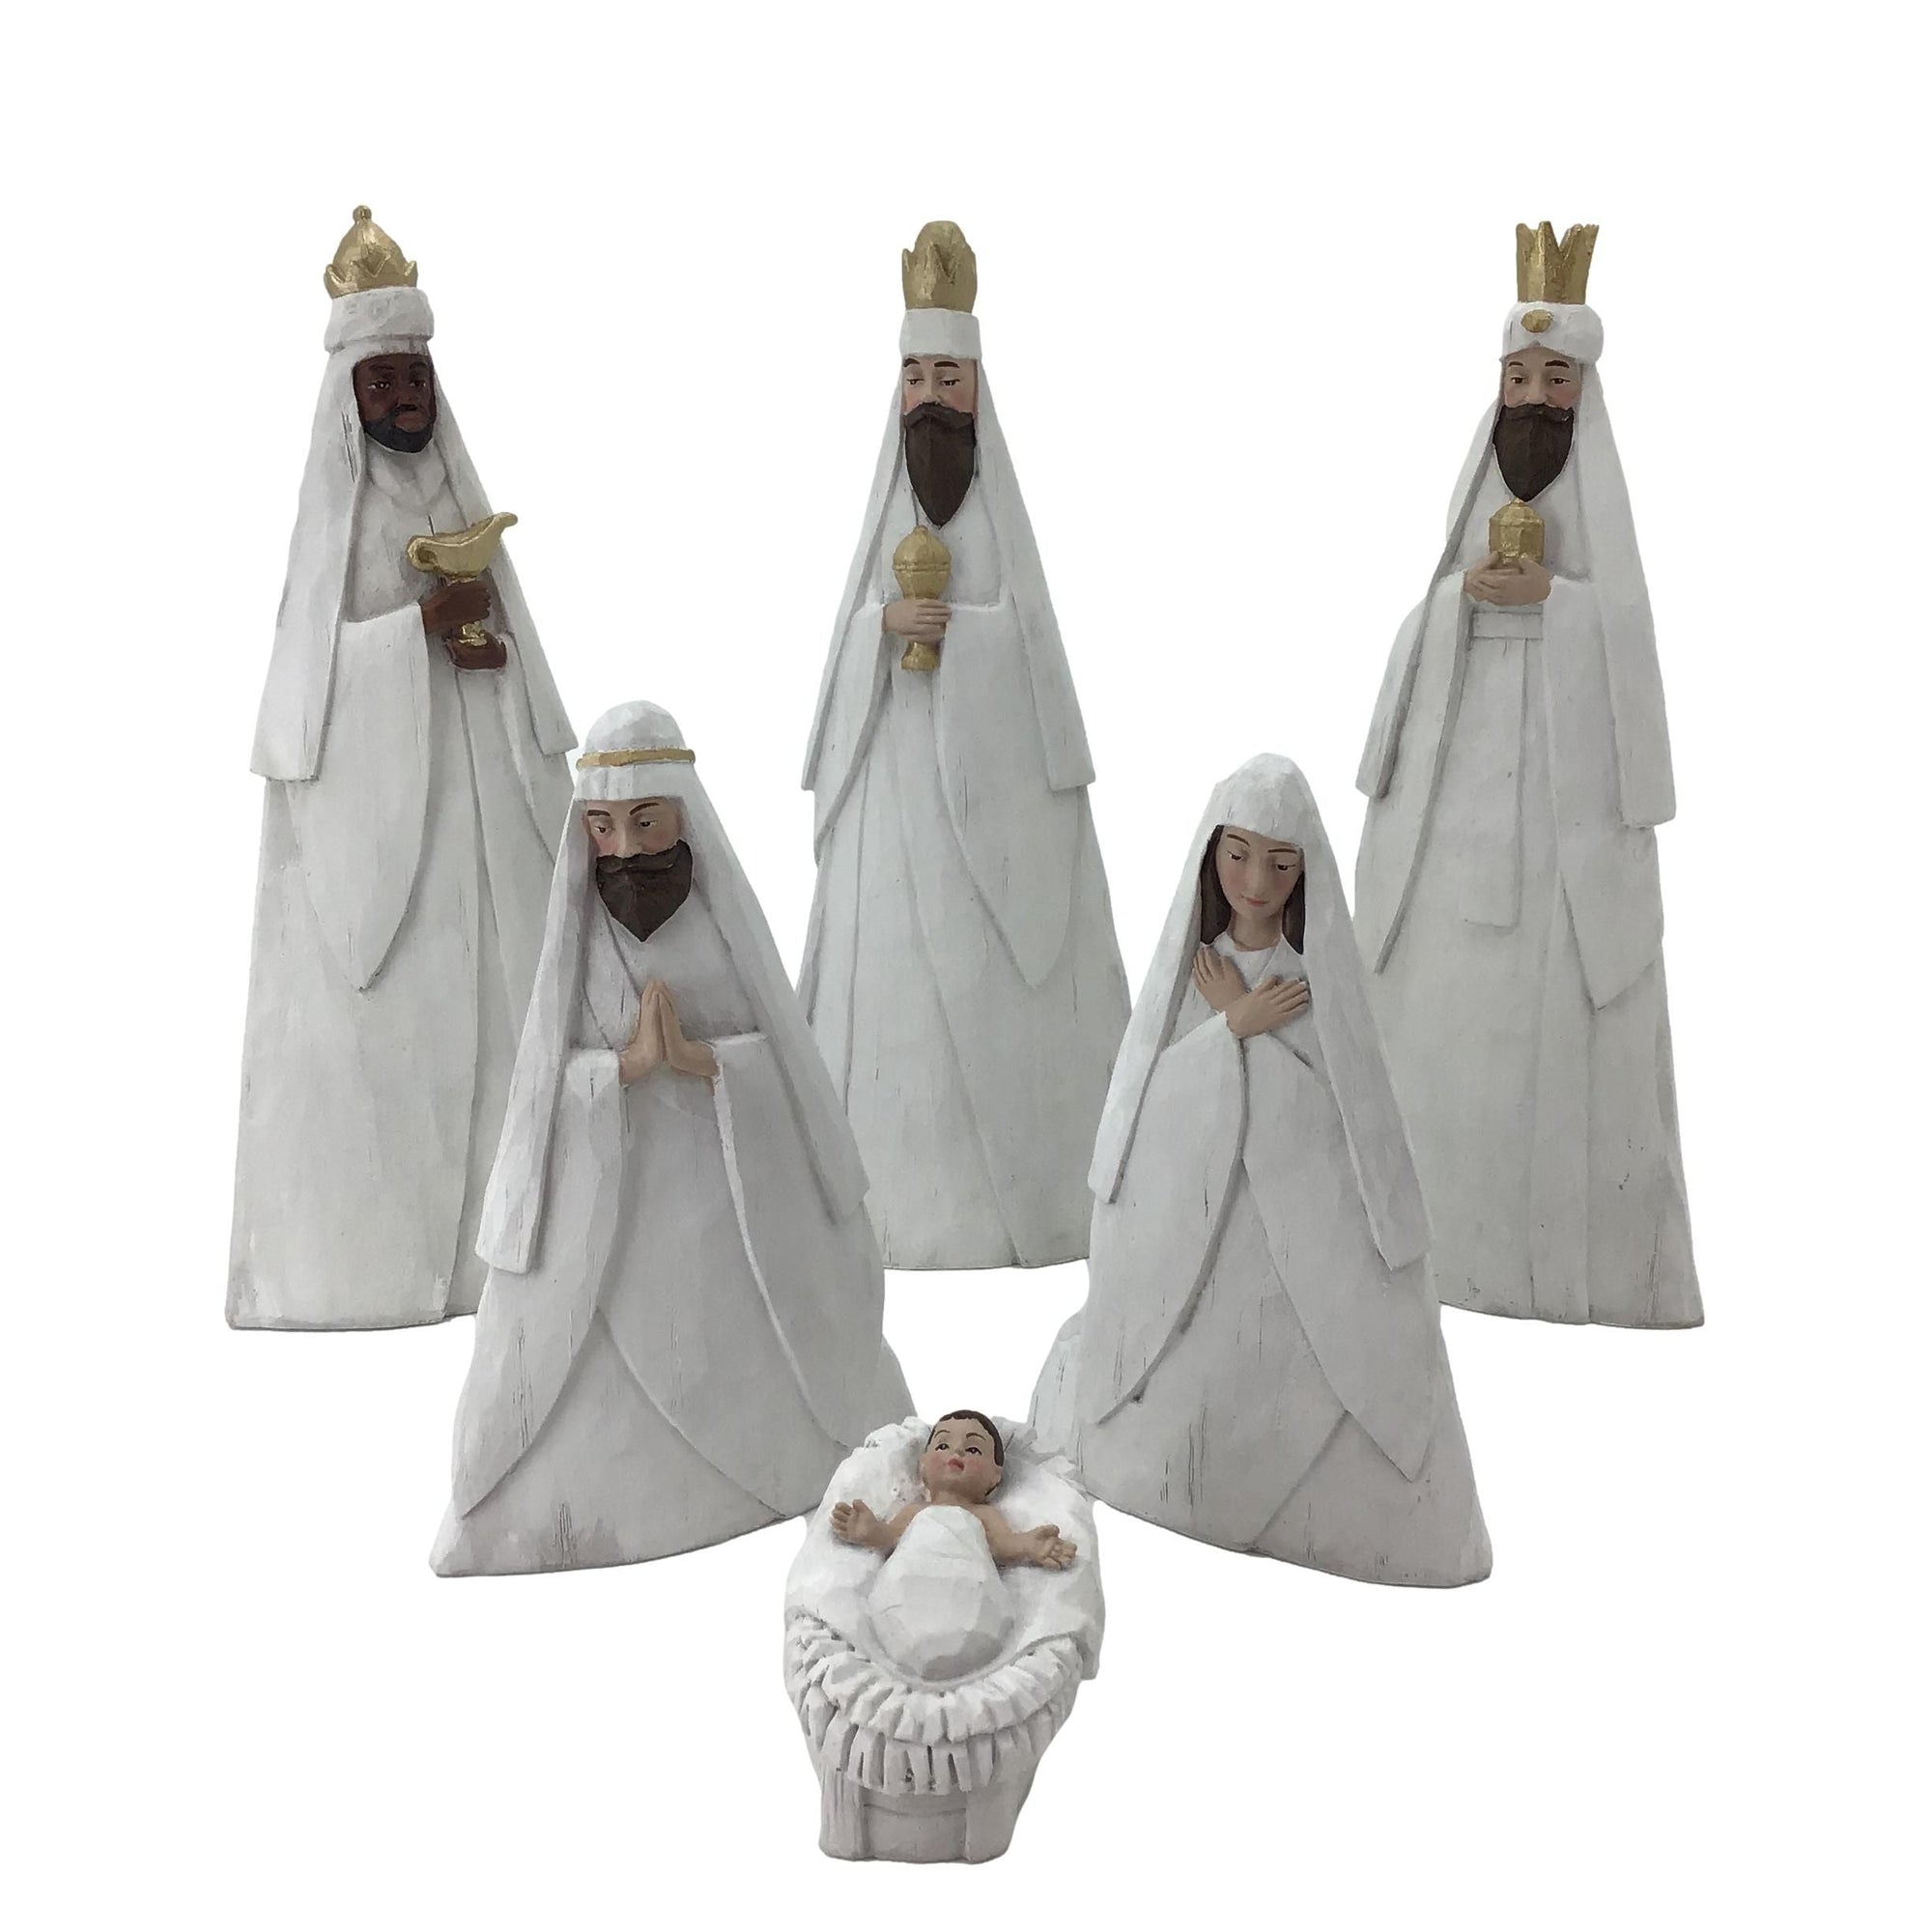 White and Gold Nativity 6 Piece Set - My Christmas